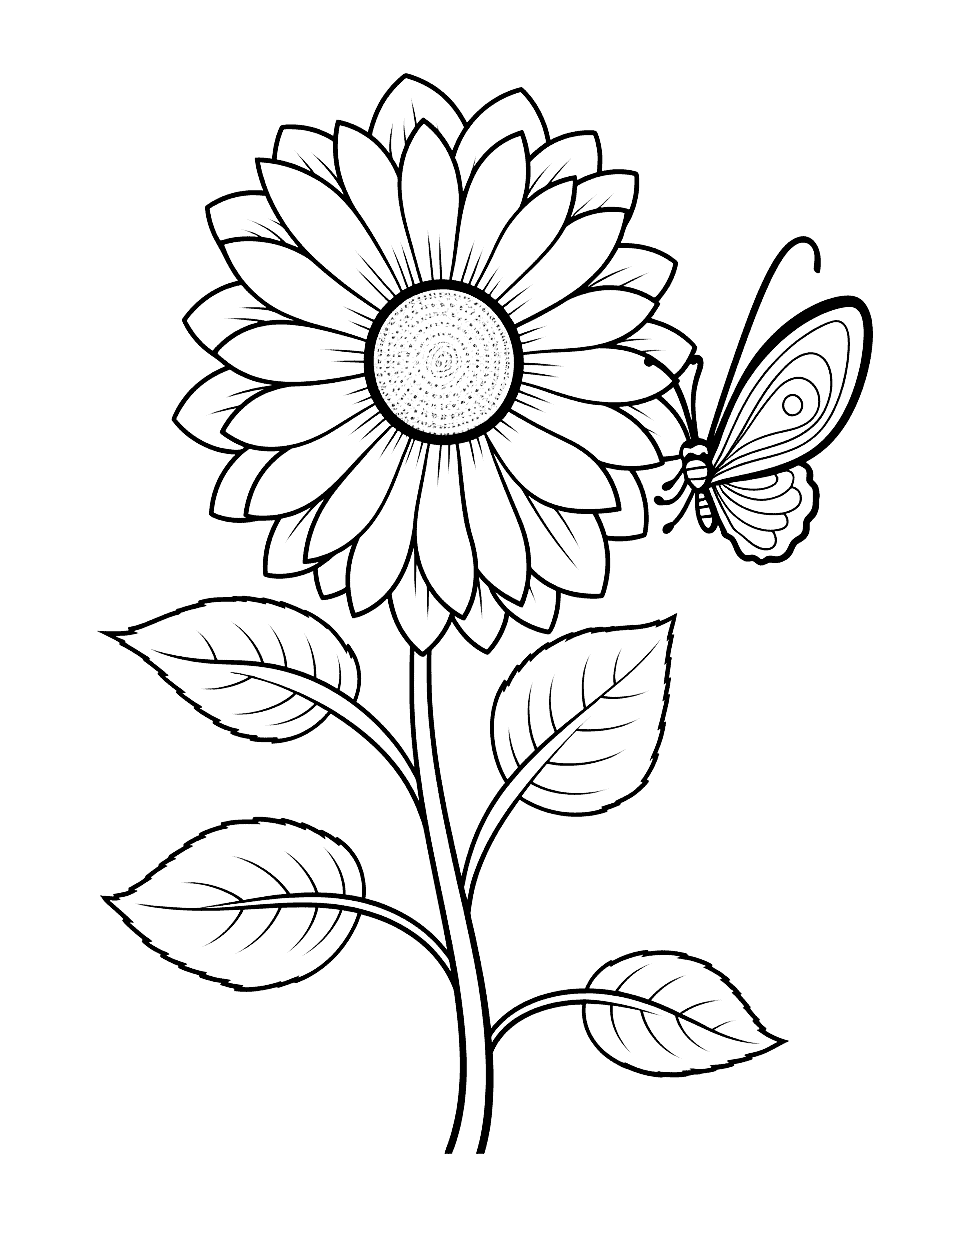 Sunflower and Butterfly Flower Coloring Page - A pretty sunflower with a cute butterfly perched on its petal.